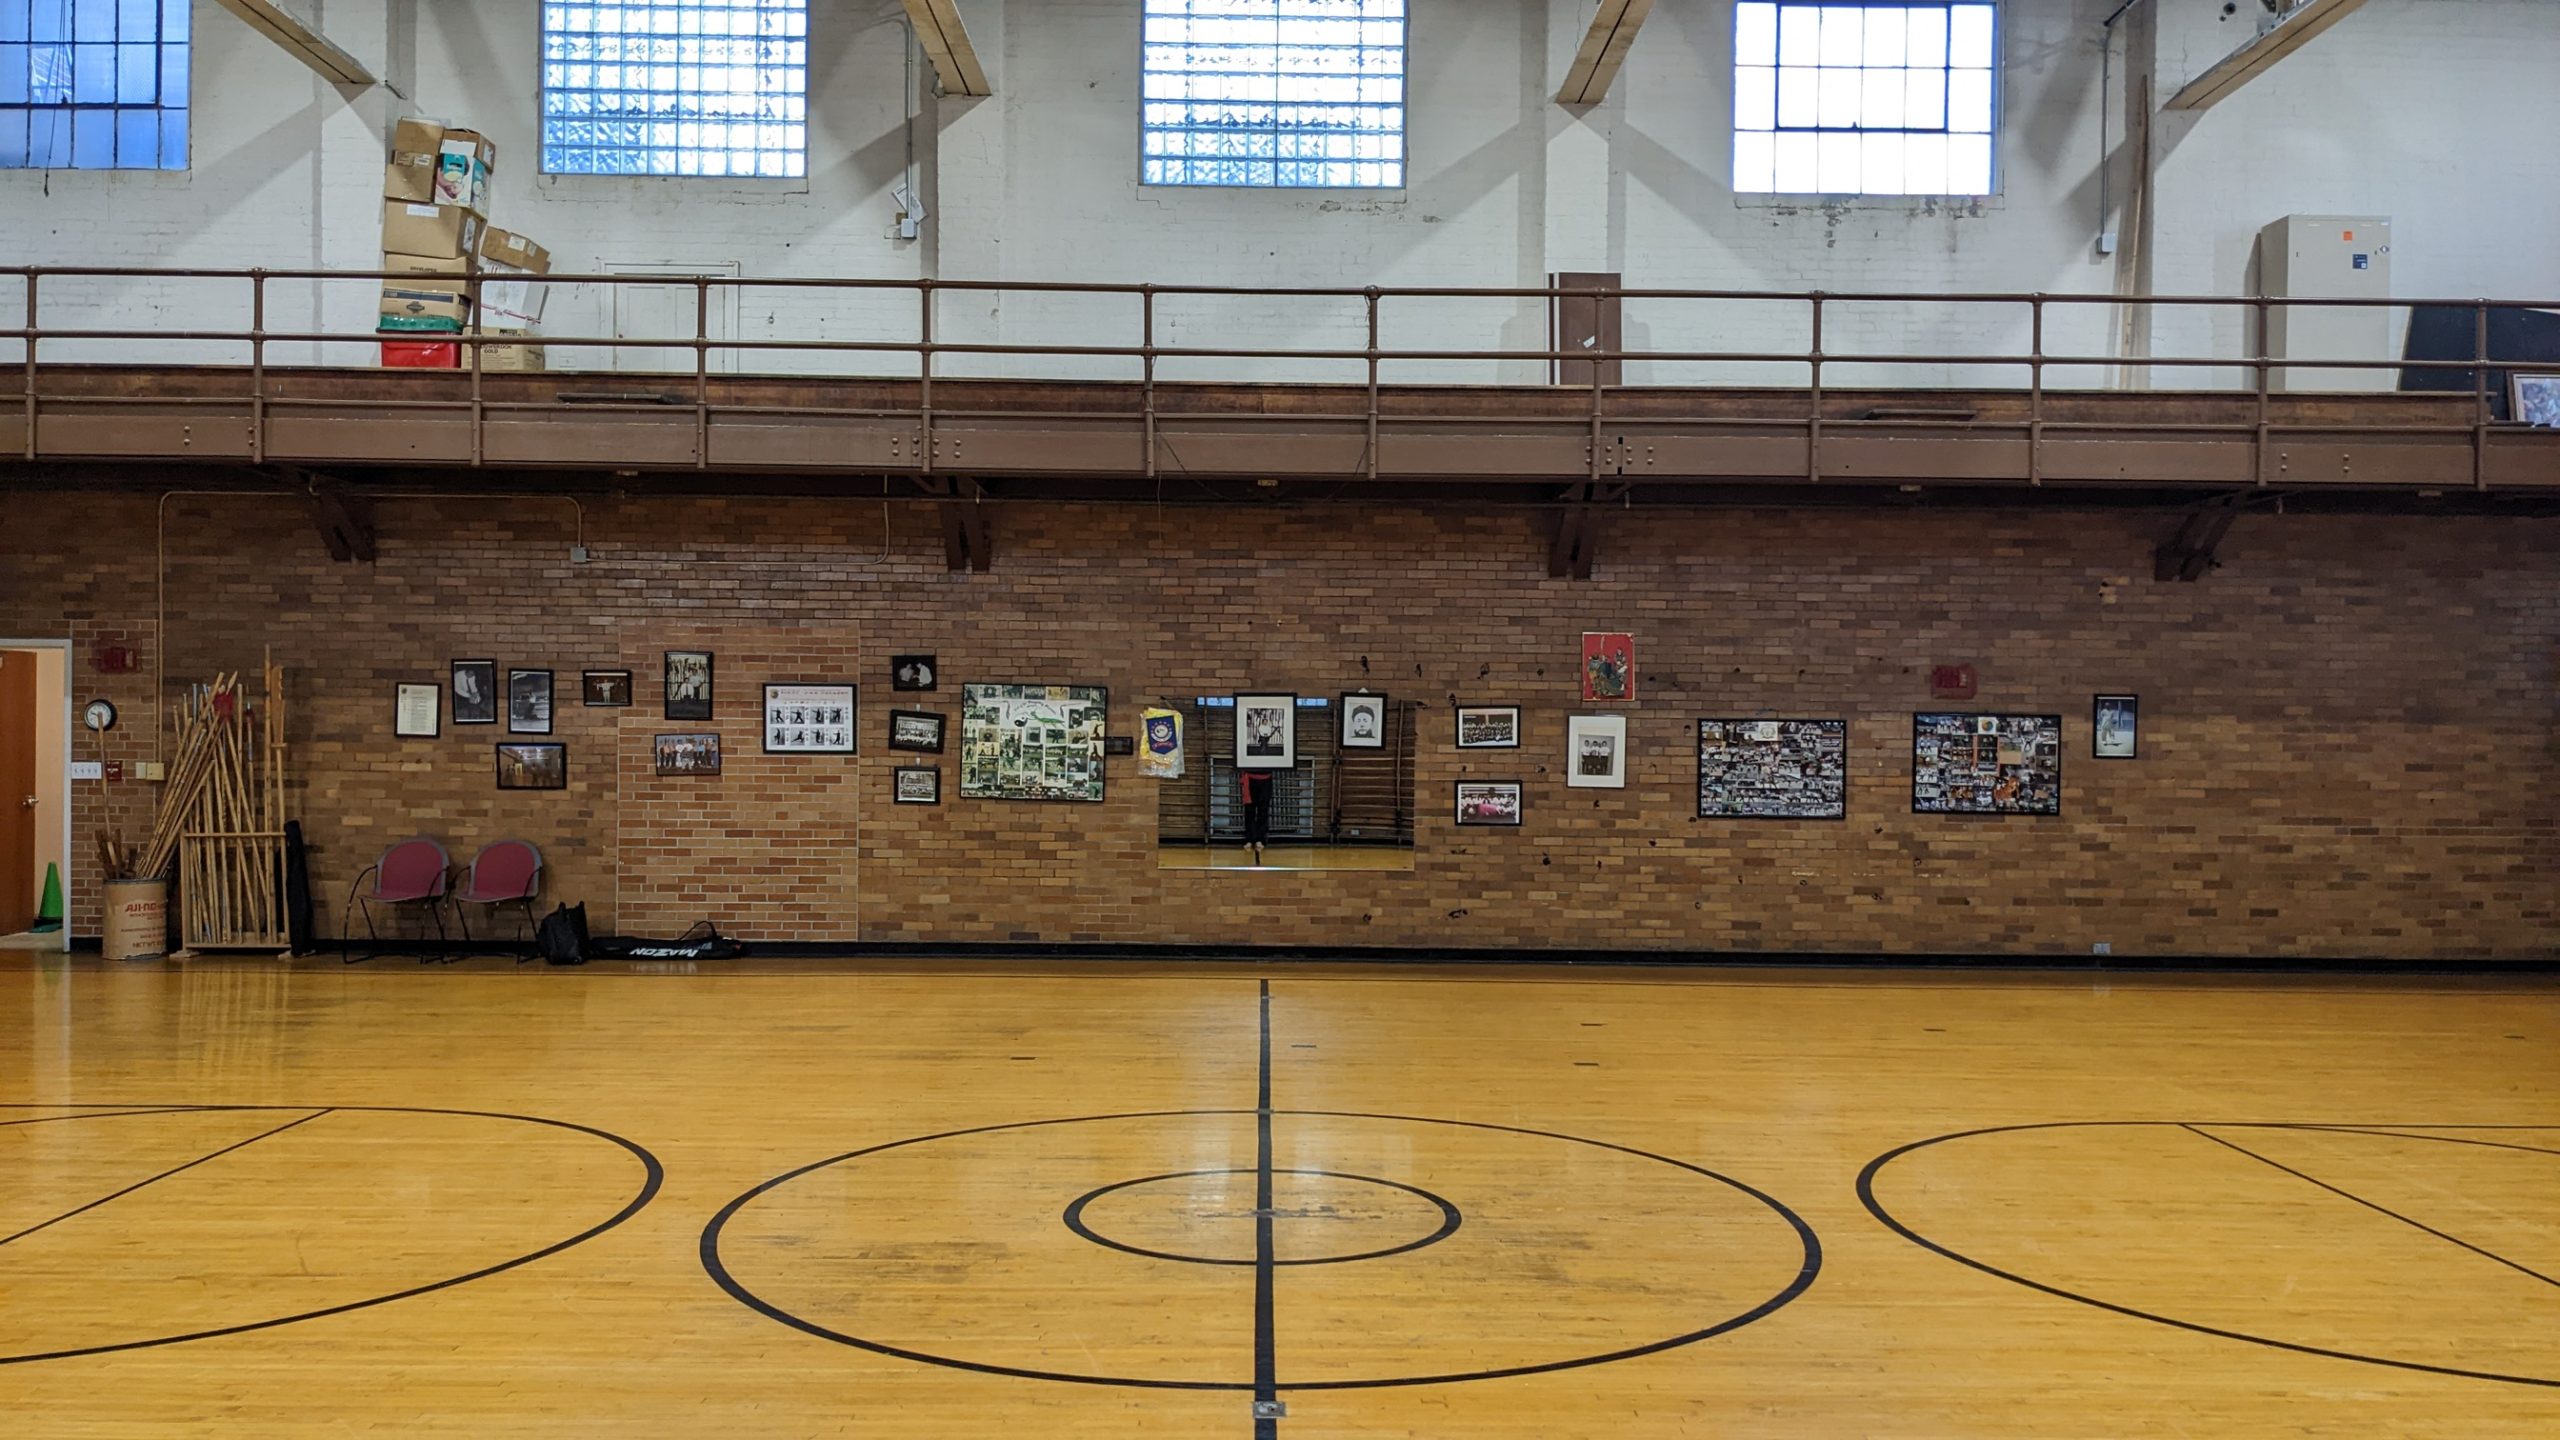 The gymnasium at the YWCA West Central Michigan, set up for class.